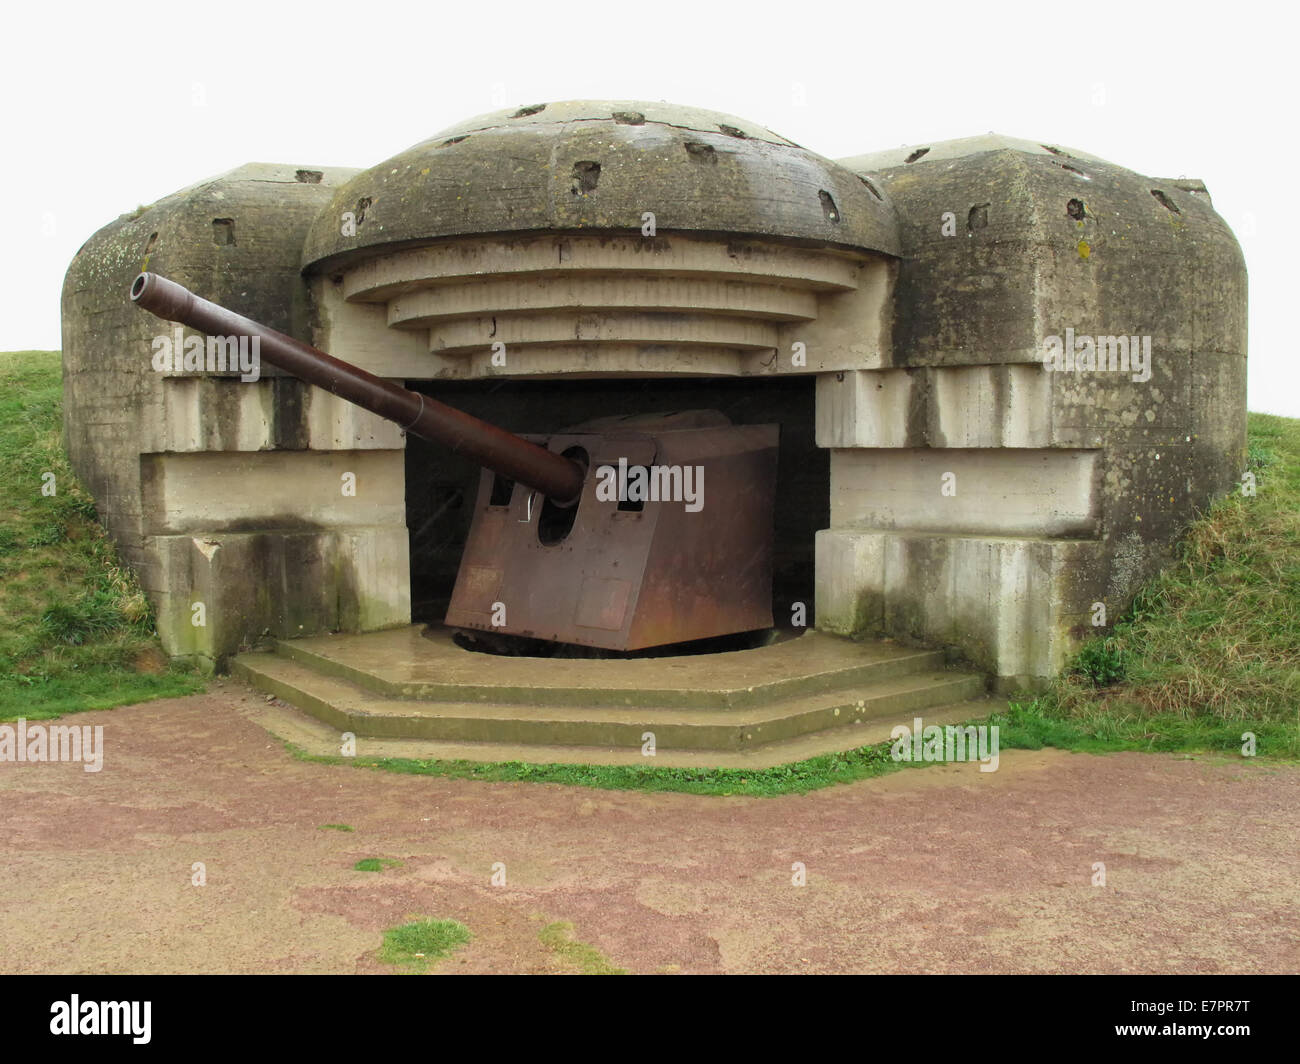 The remains of the German World War Two Atlantic Wall gun battery at Longues-sur-Mer in Normandy, France. Stock Photo